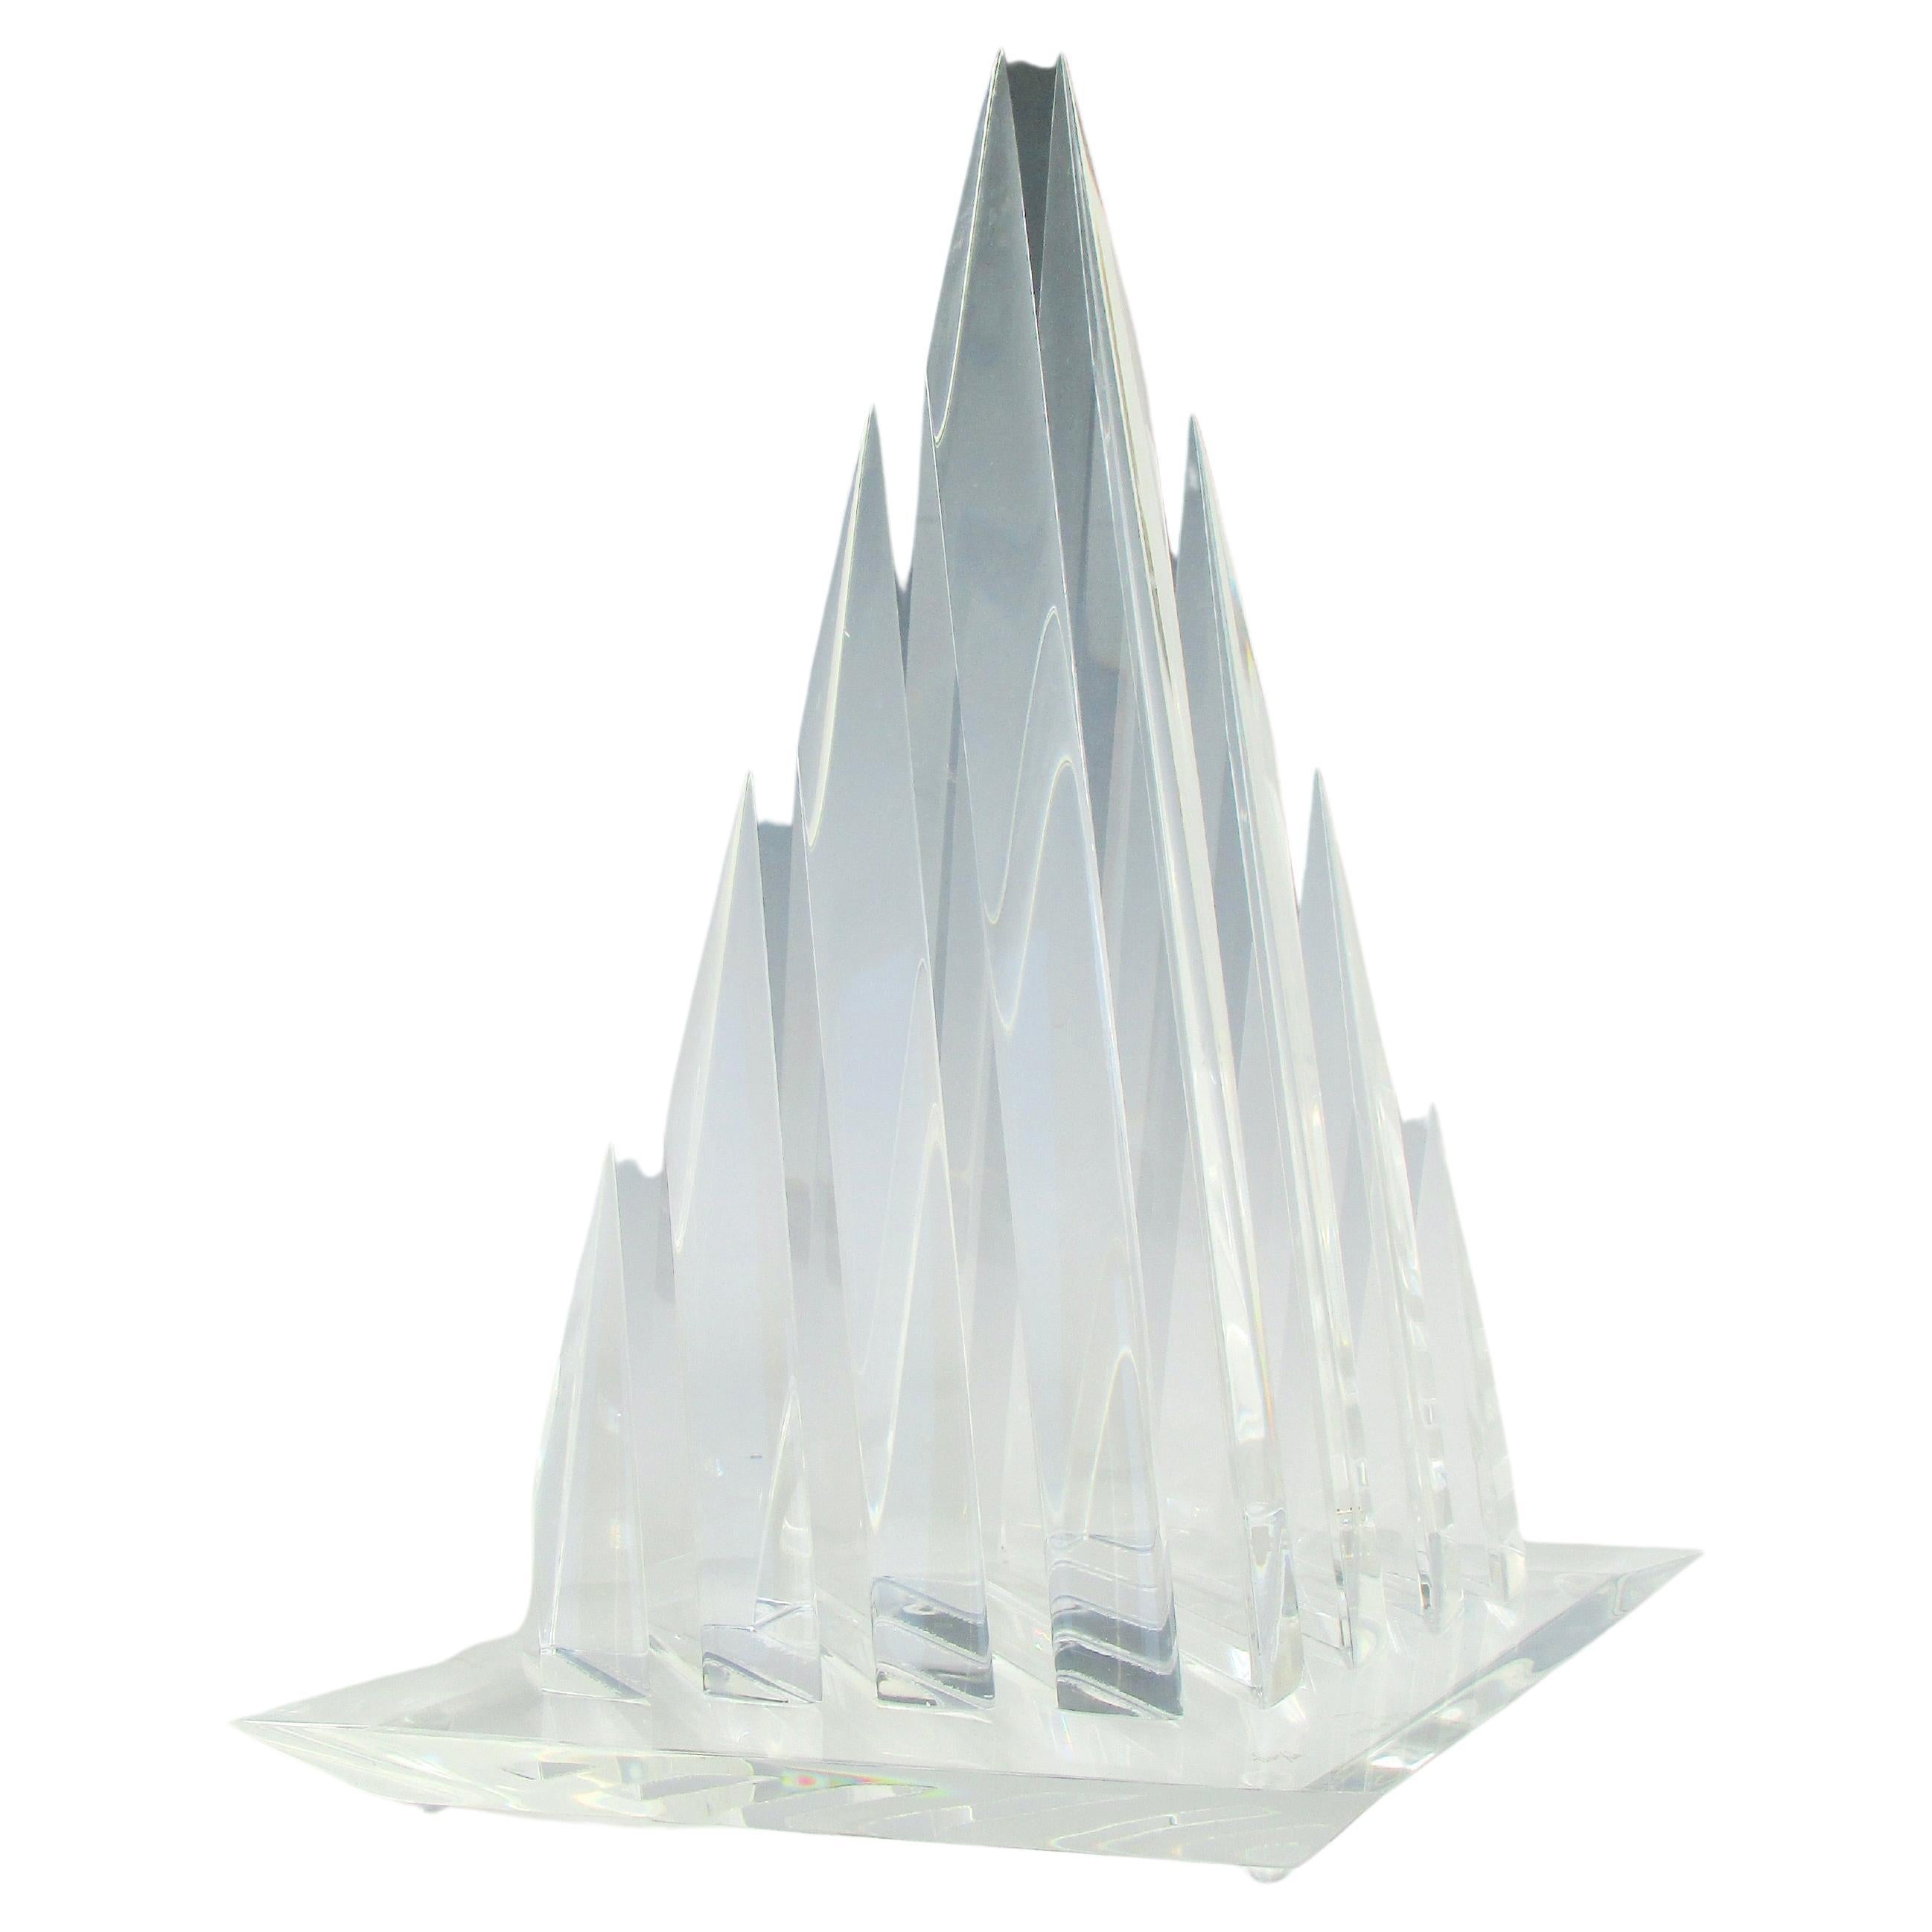 Acrylic Lucite sculpture signed Van Teal on base. Graduated triangle forms each peaking to a sharp point are mounted on diamond shape base. Could pass for an item out of Supermans Fortress of Solitude collection. Very clean original condition.